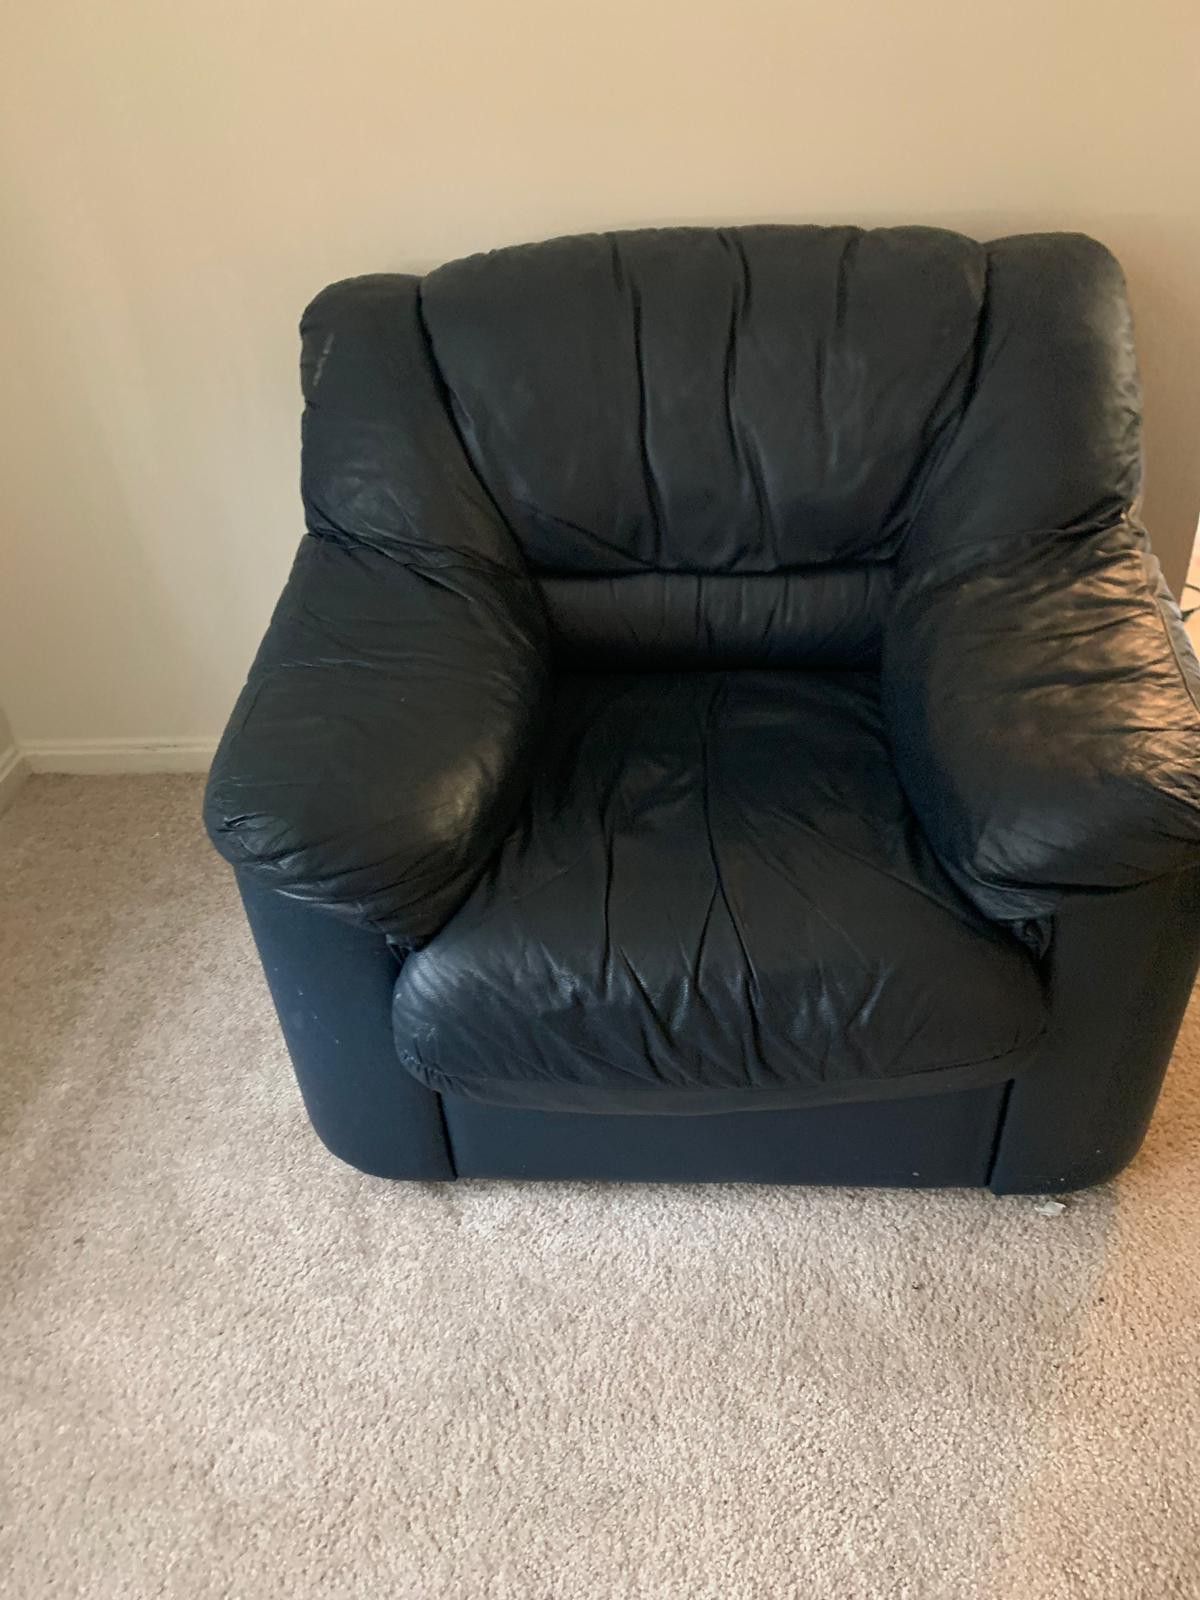 2 couches FREE (pickup today)